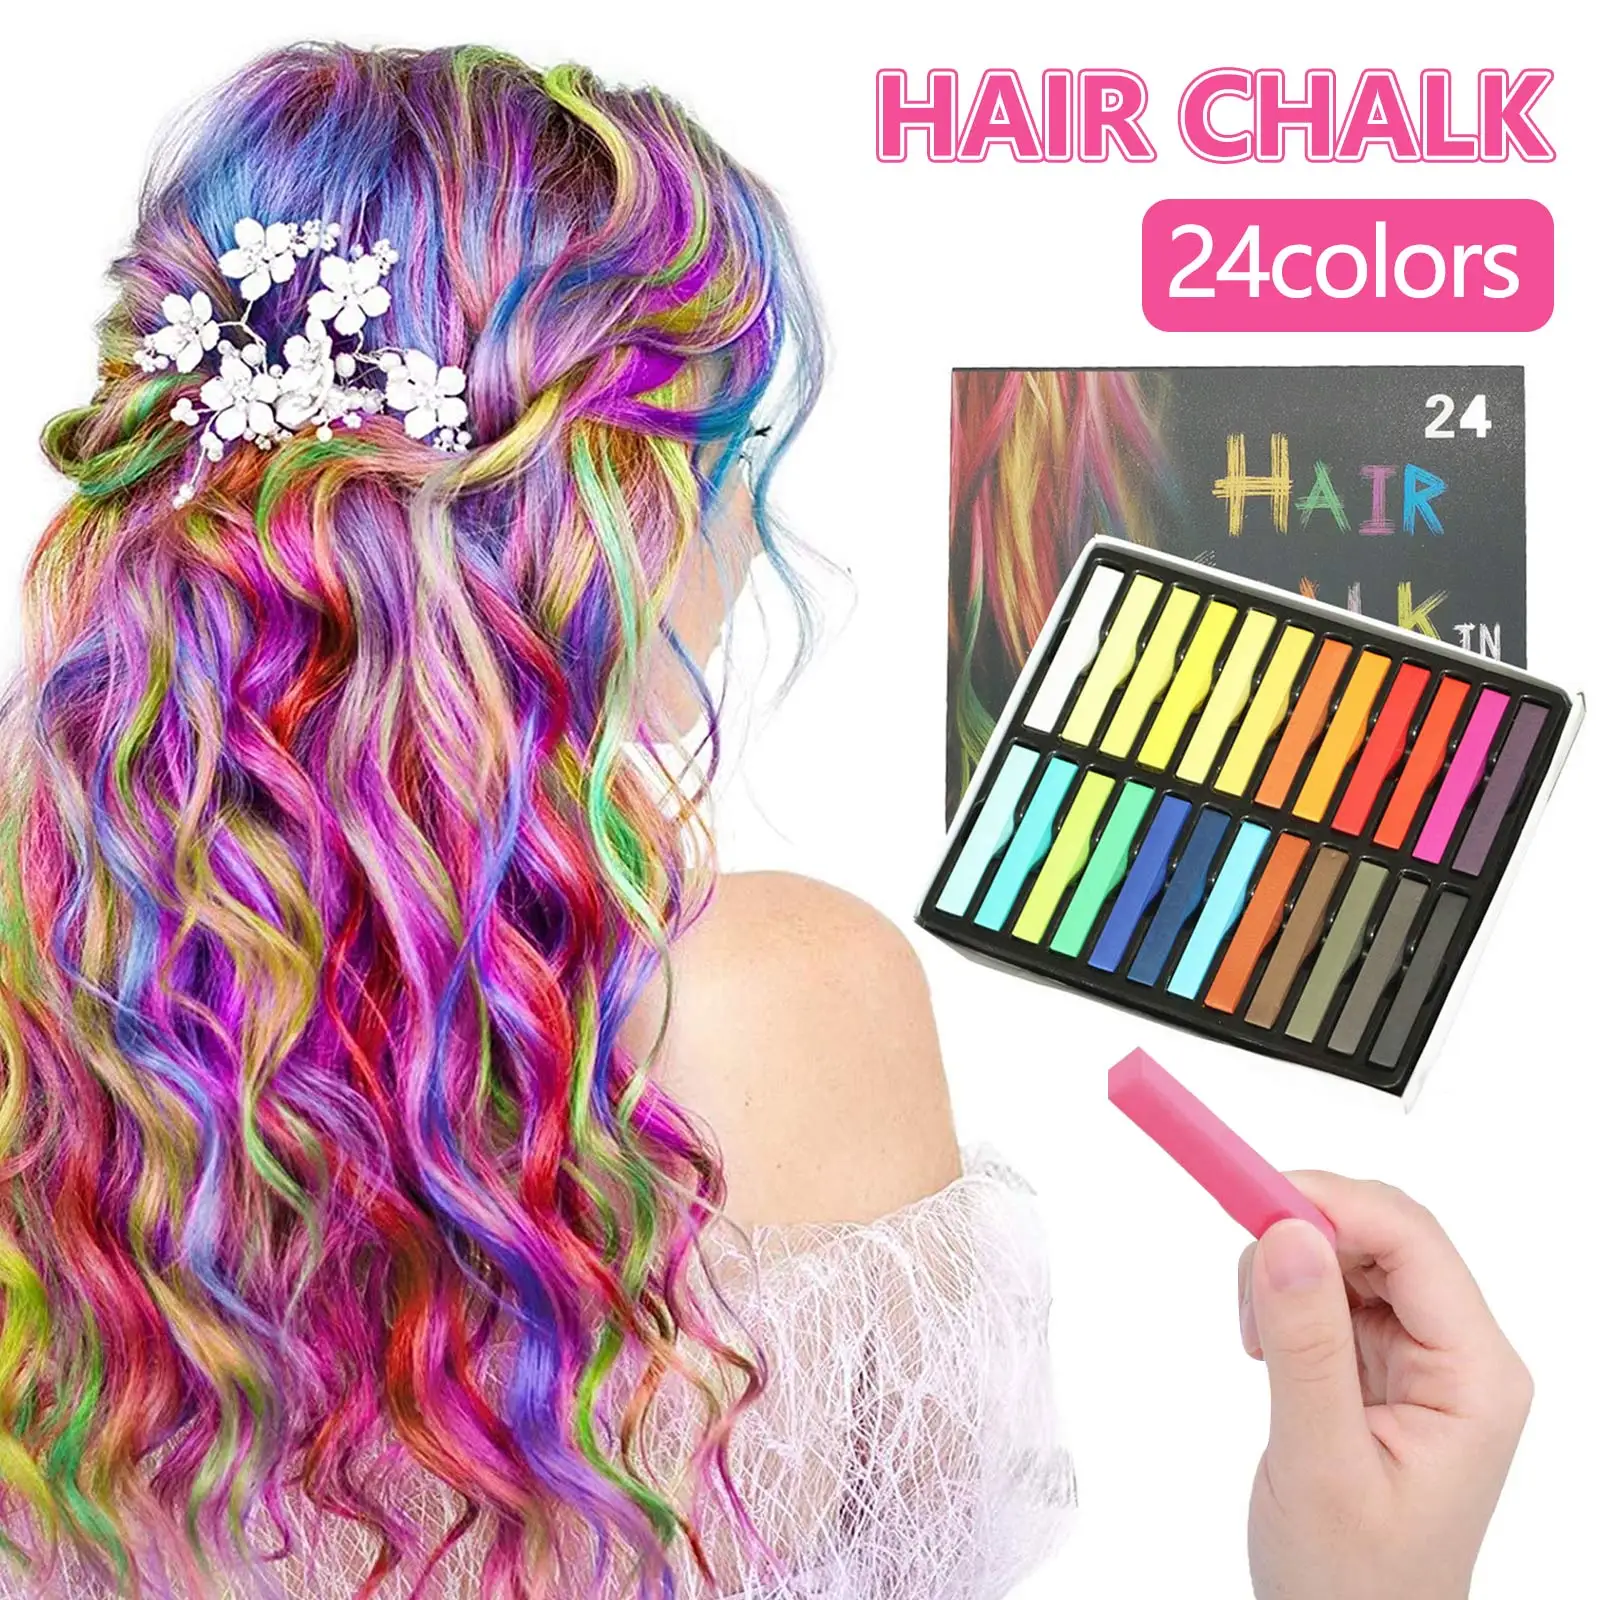 

24PCS 24 Colors Fashion Hair Color Chalks Temporary Colors Hair Dye Pastels Kit for Festival Party Cosplay Hair Dyeing Tools